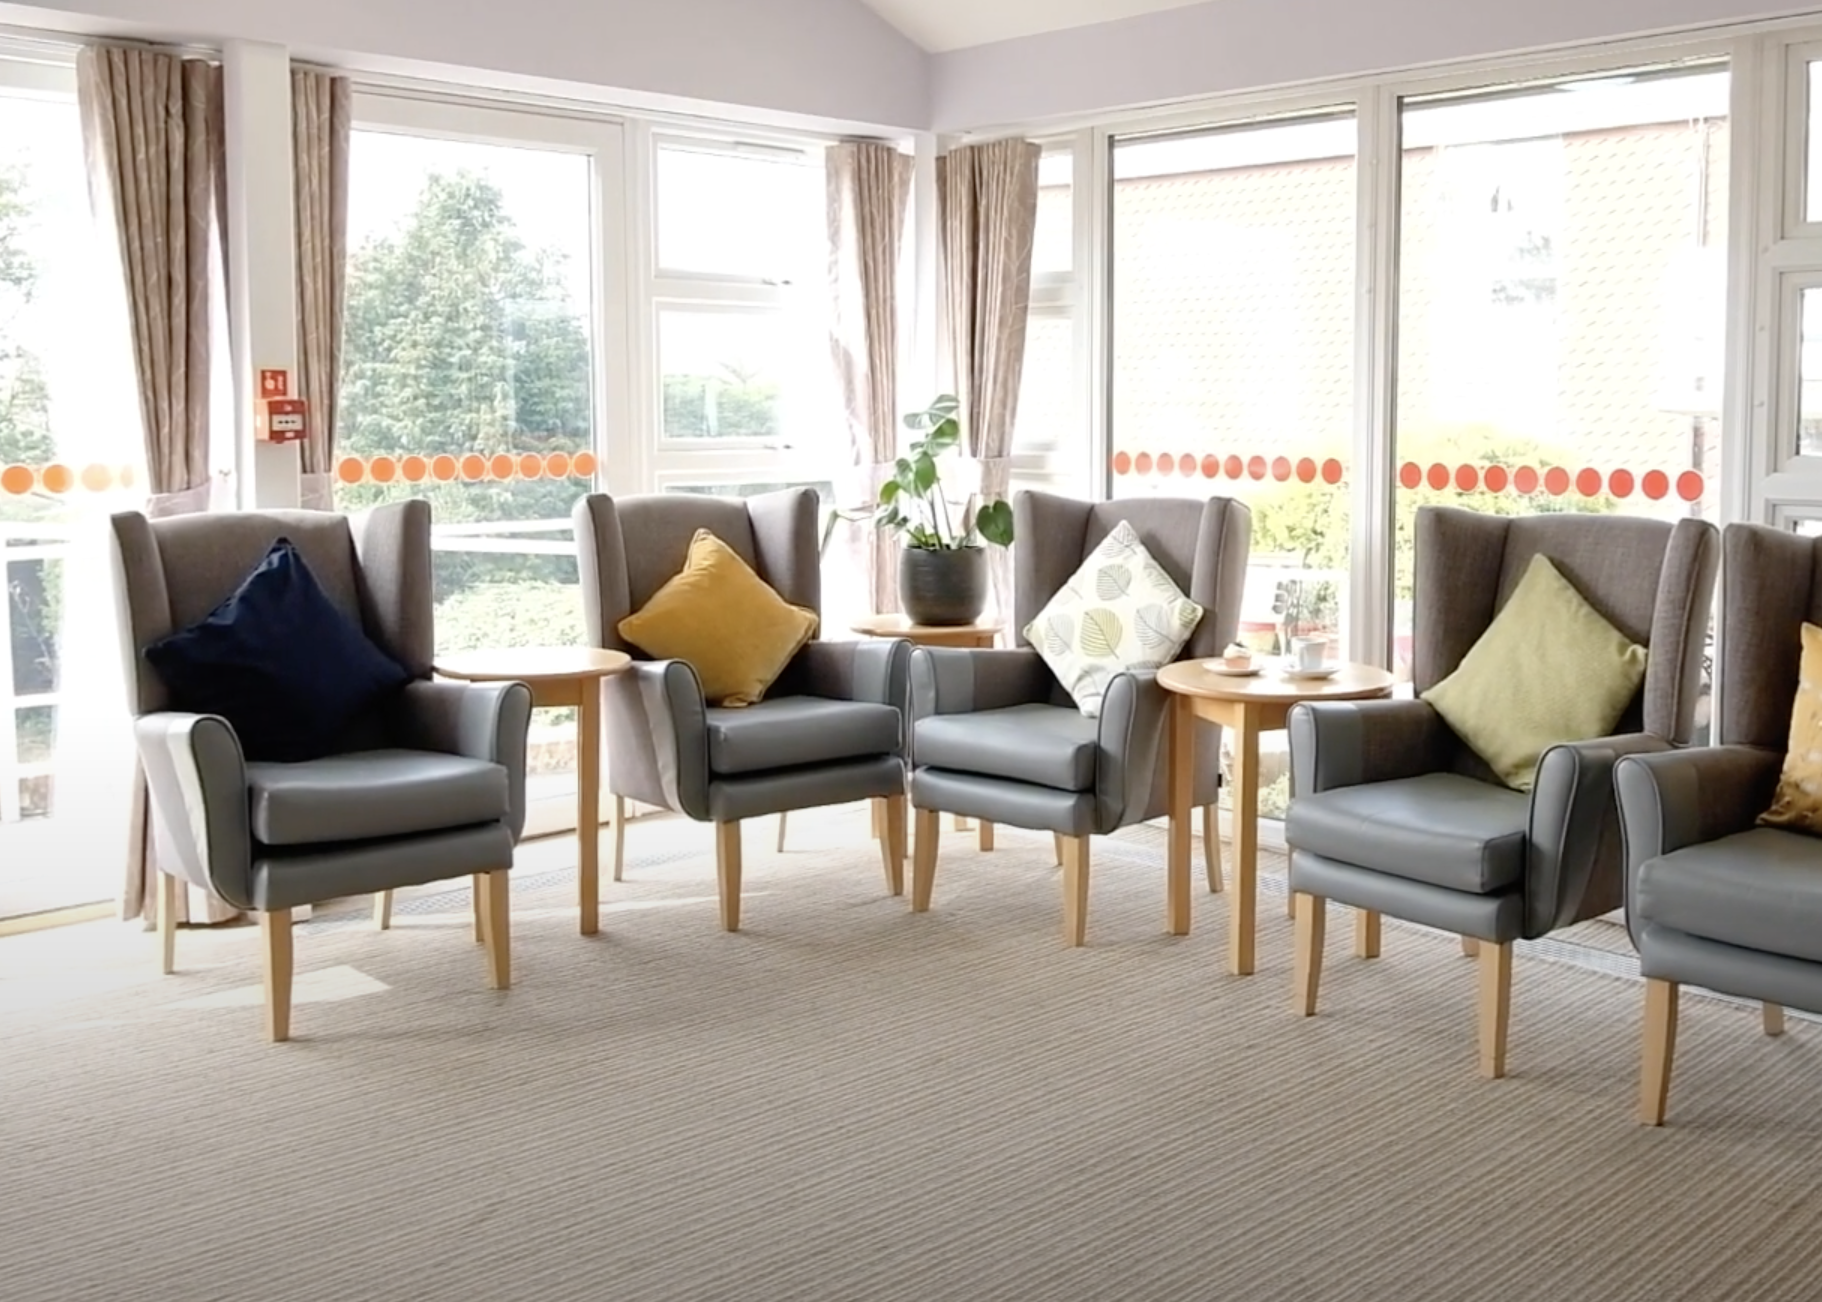 Sussex Housing and Care - Saxonwood care home 2